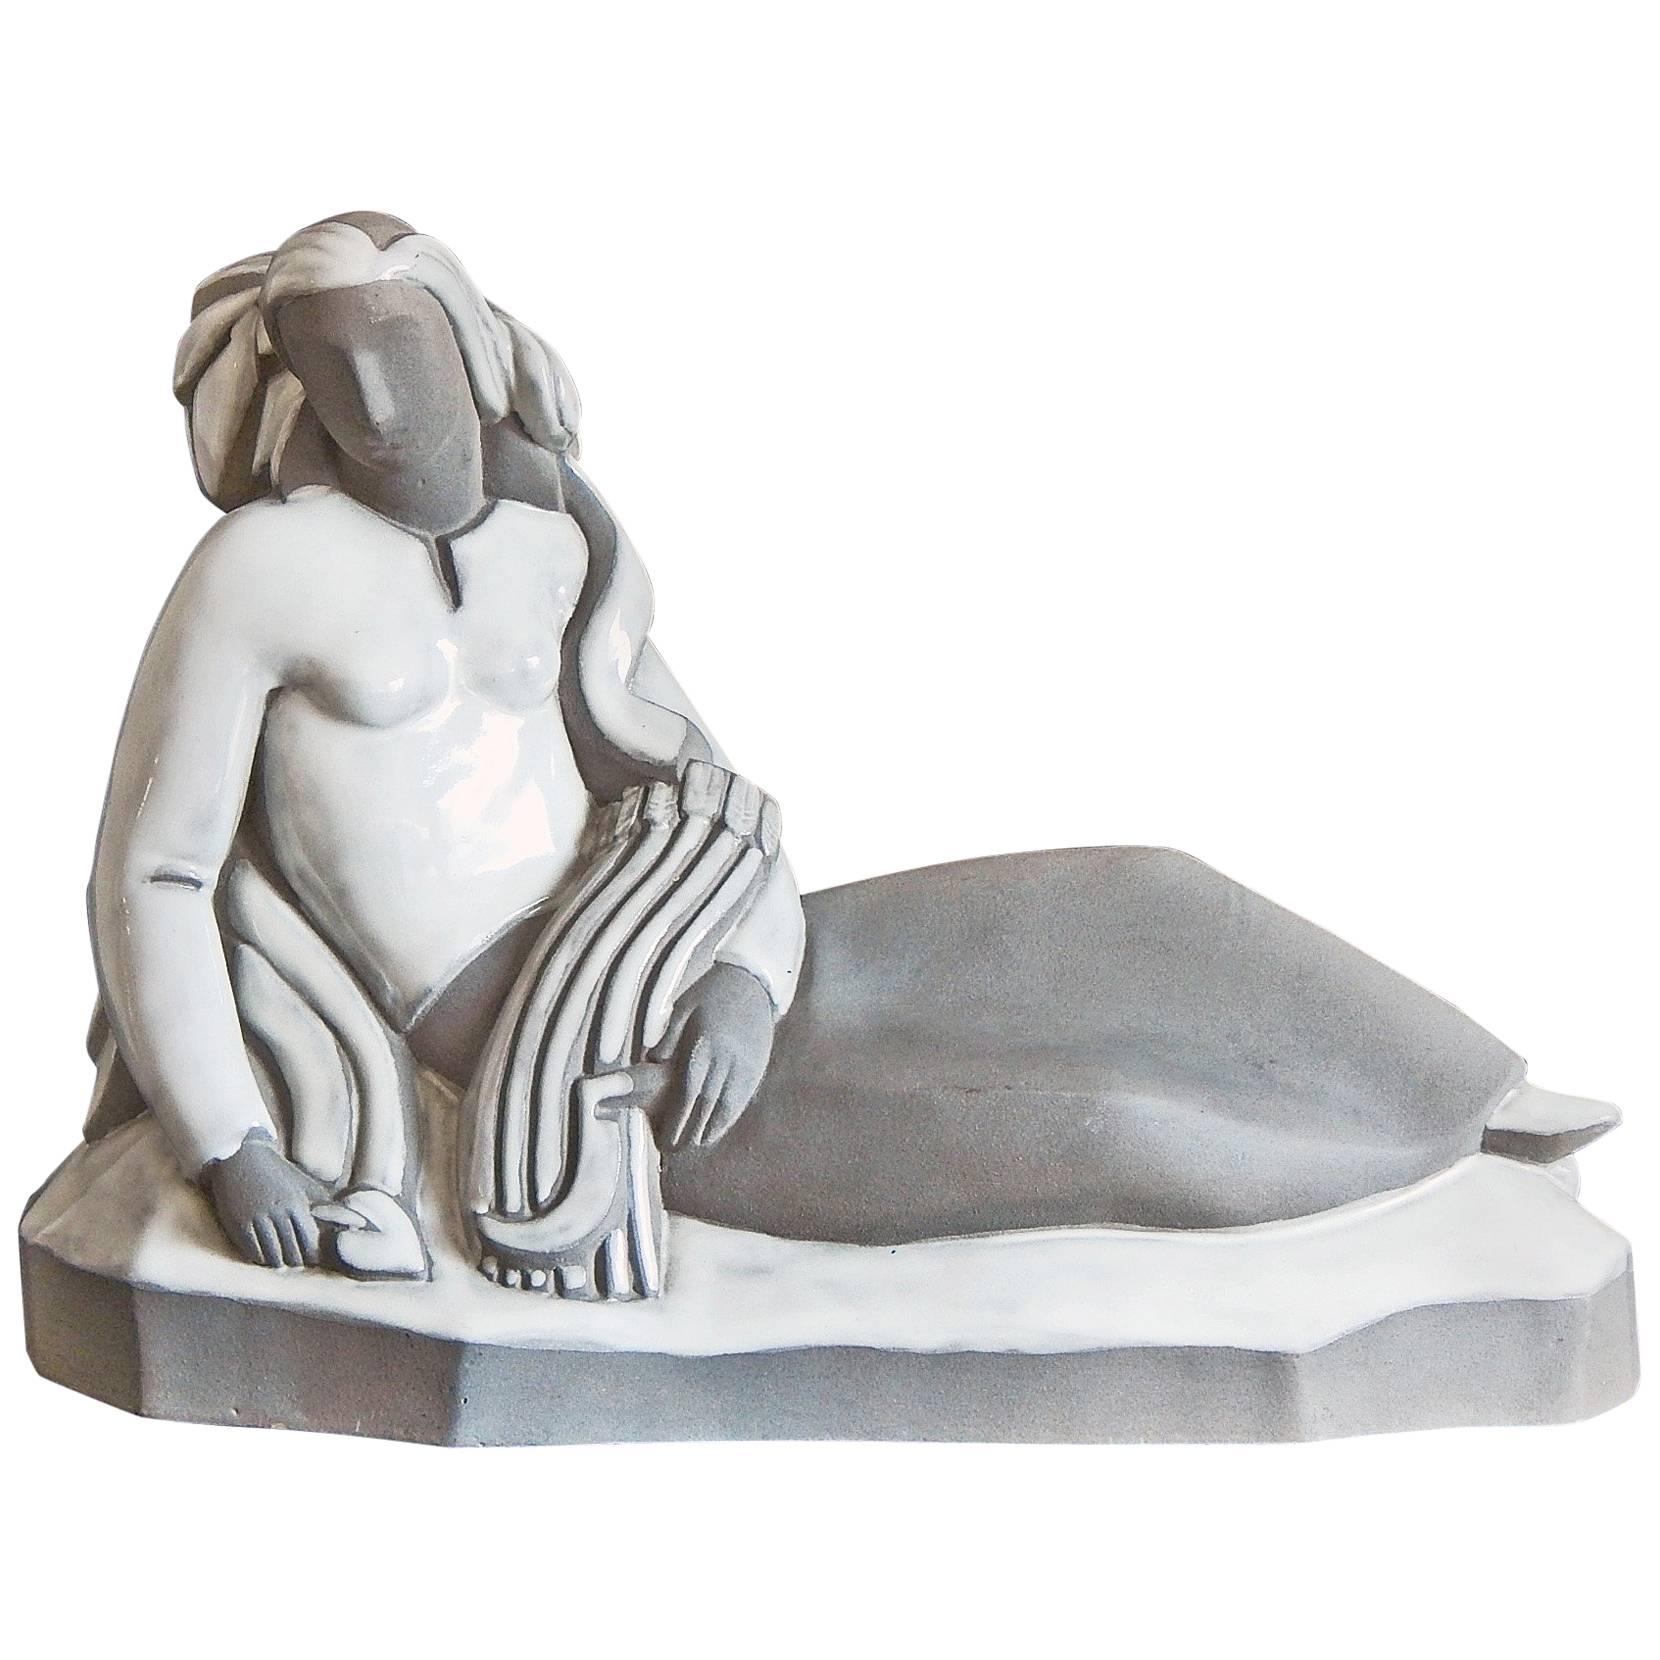 "Agriculture", High Style Art Deco Sculpture Depicting Laborer with Wheat For Sale